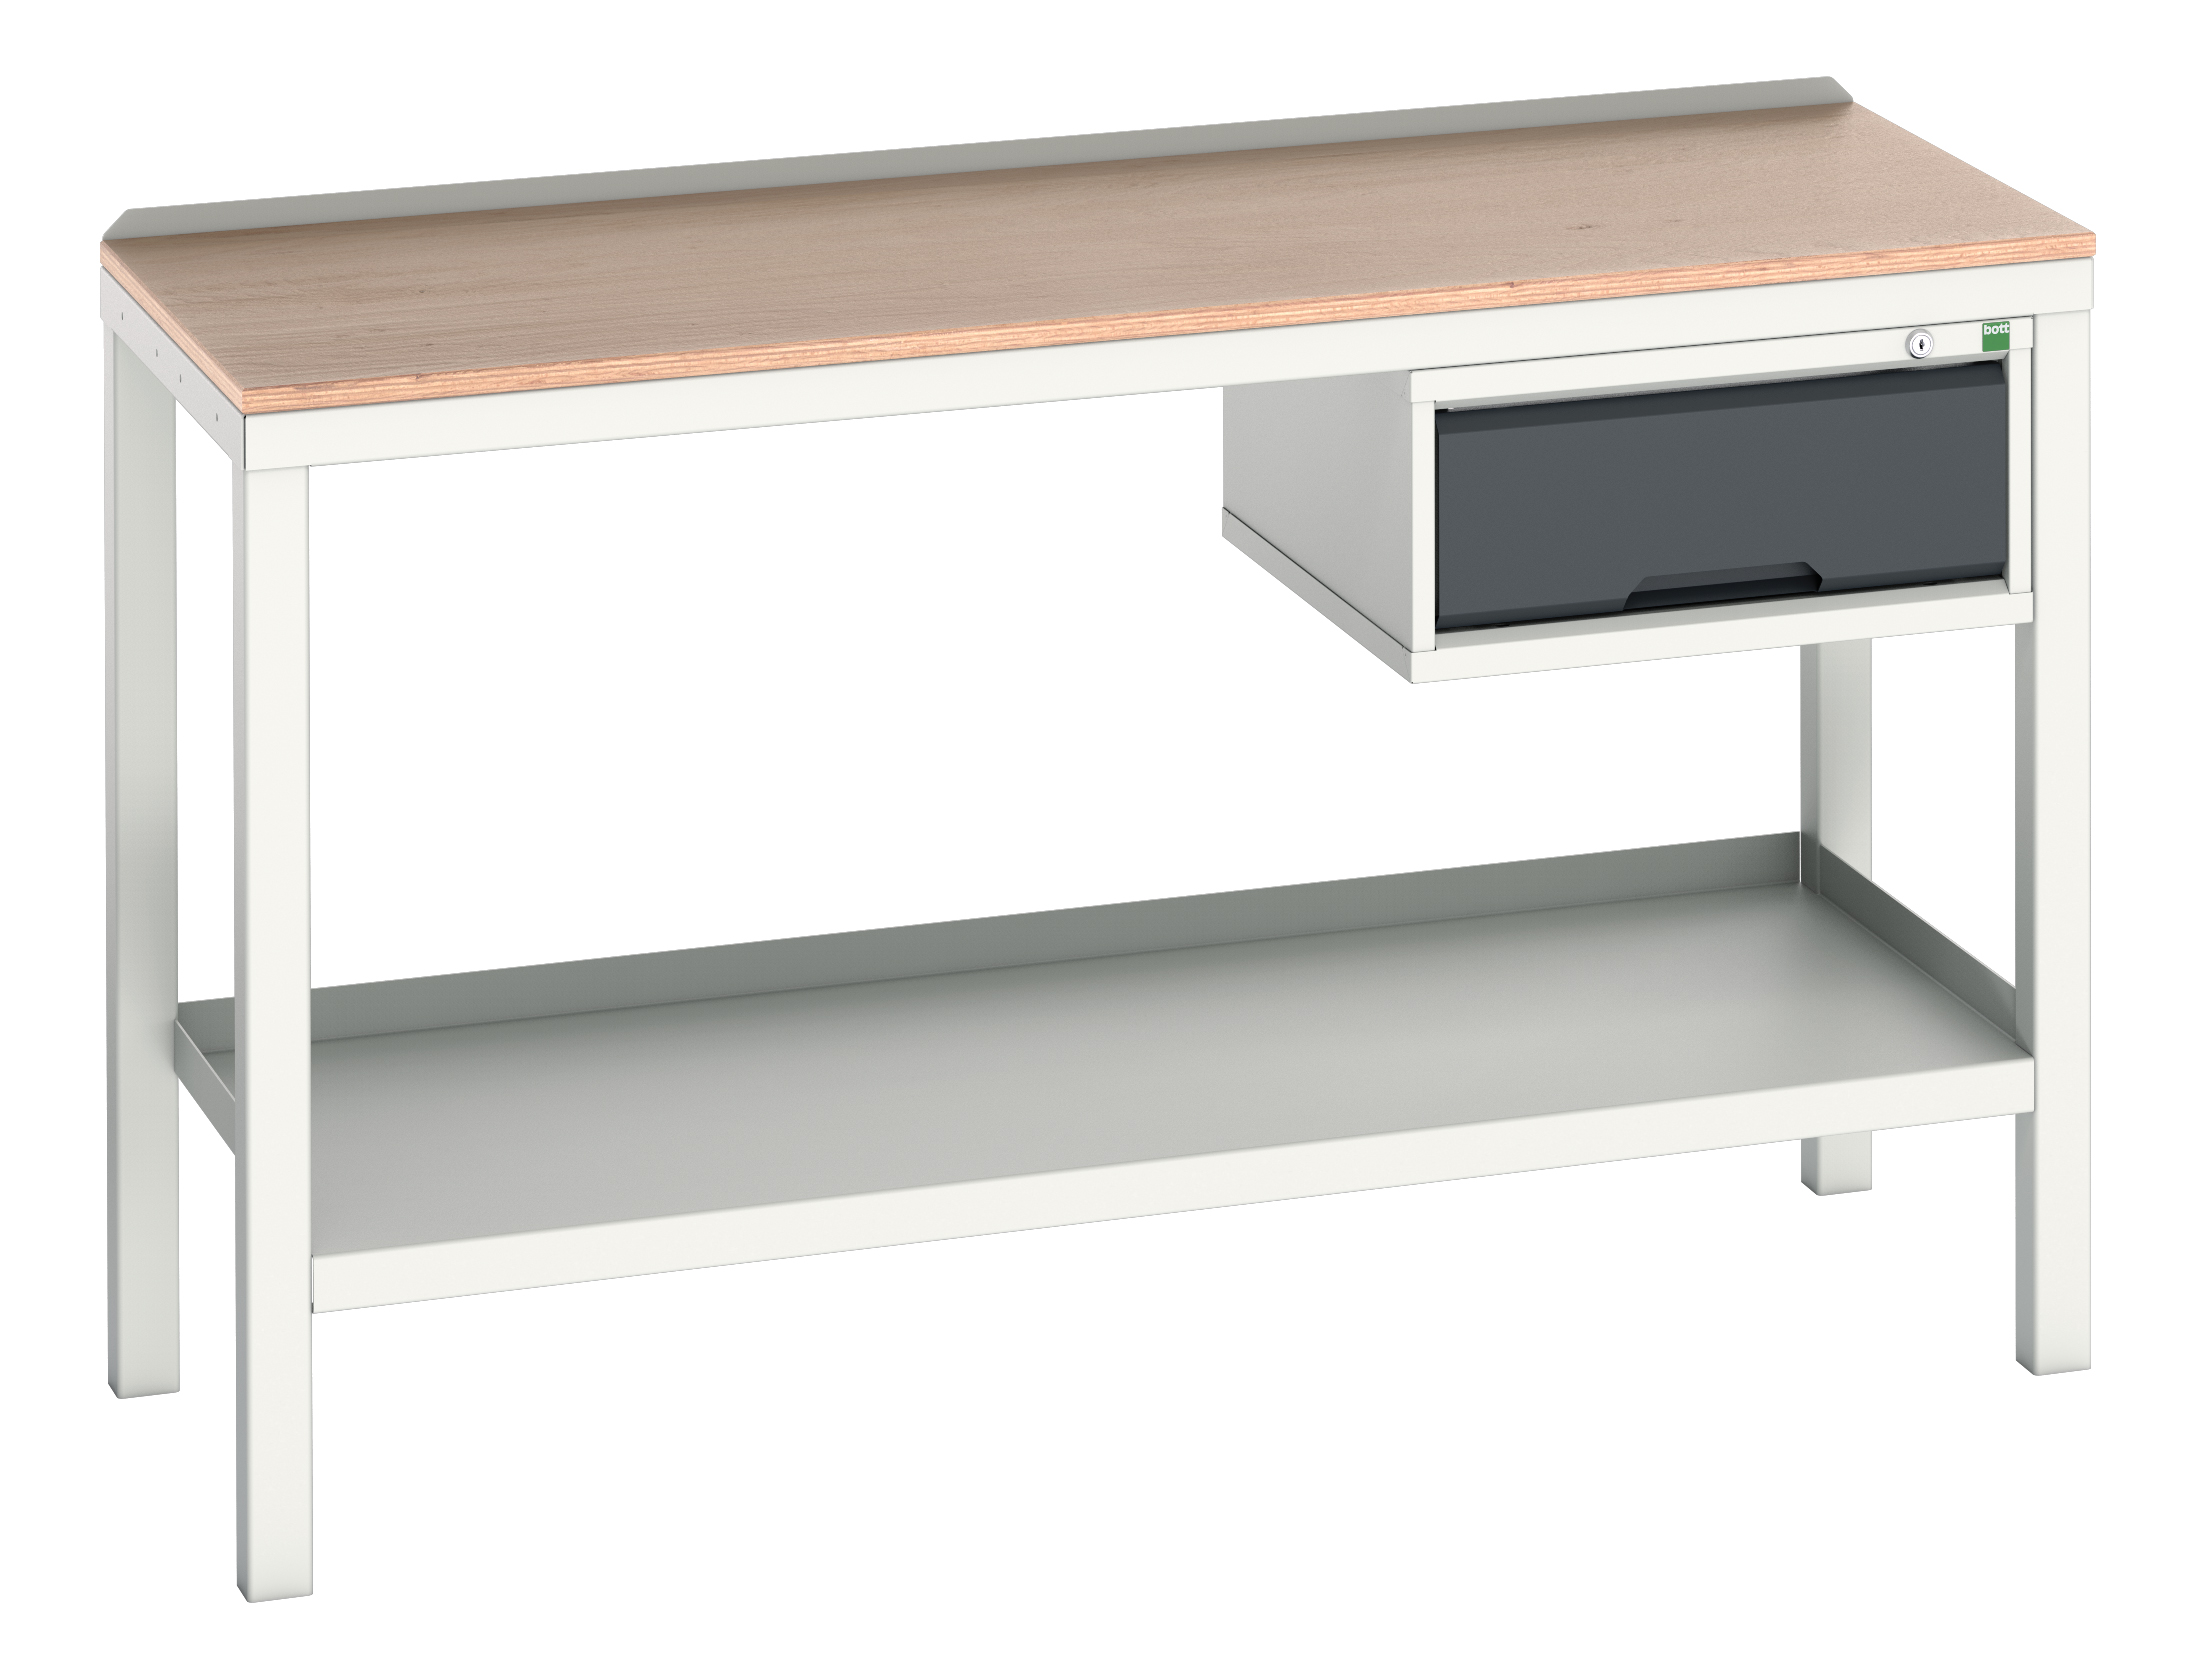 Bott Verso Welded Bench With 1 Drawer Cabinet - 16922605.19